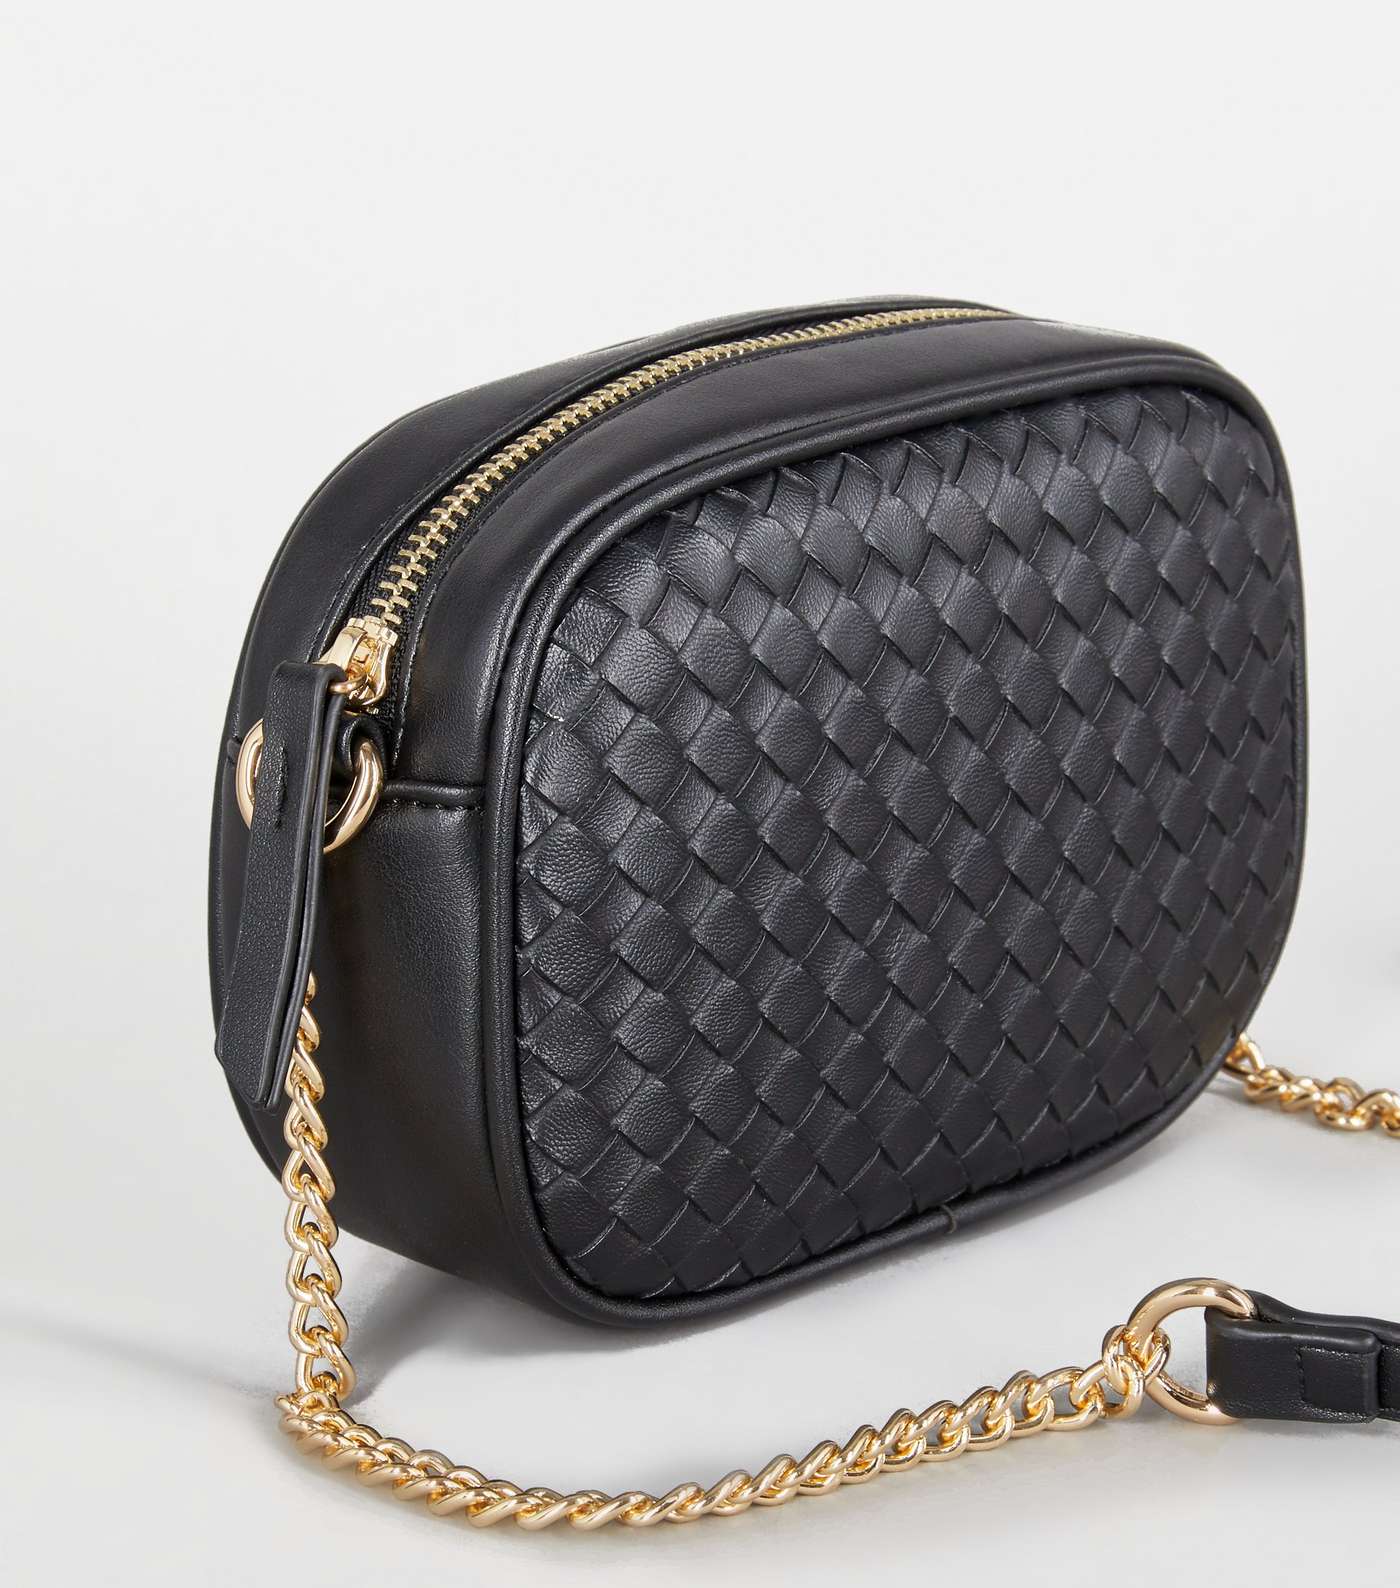 Black Woven Leather-Look Camera Bag Image 2